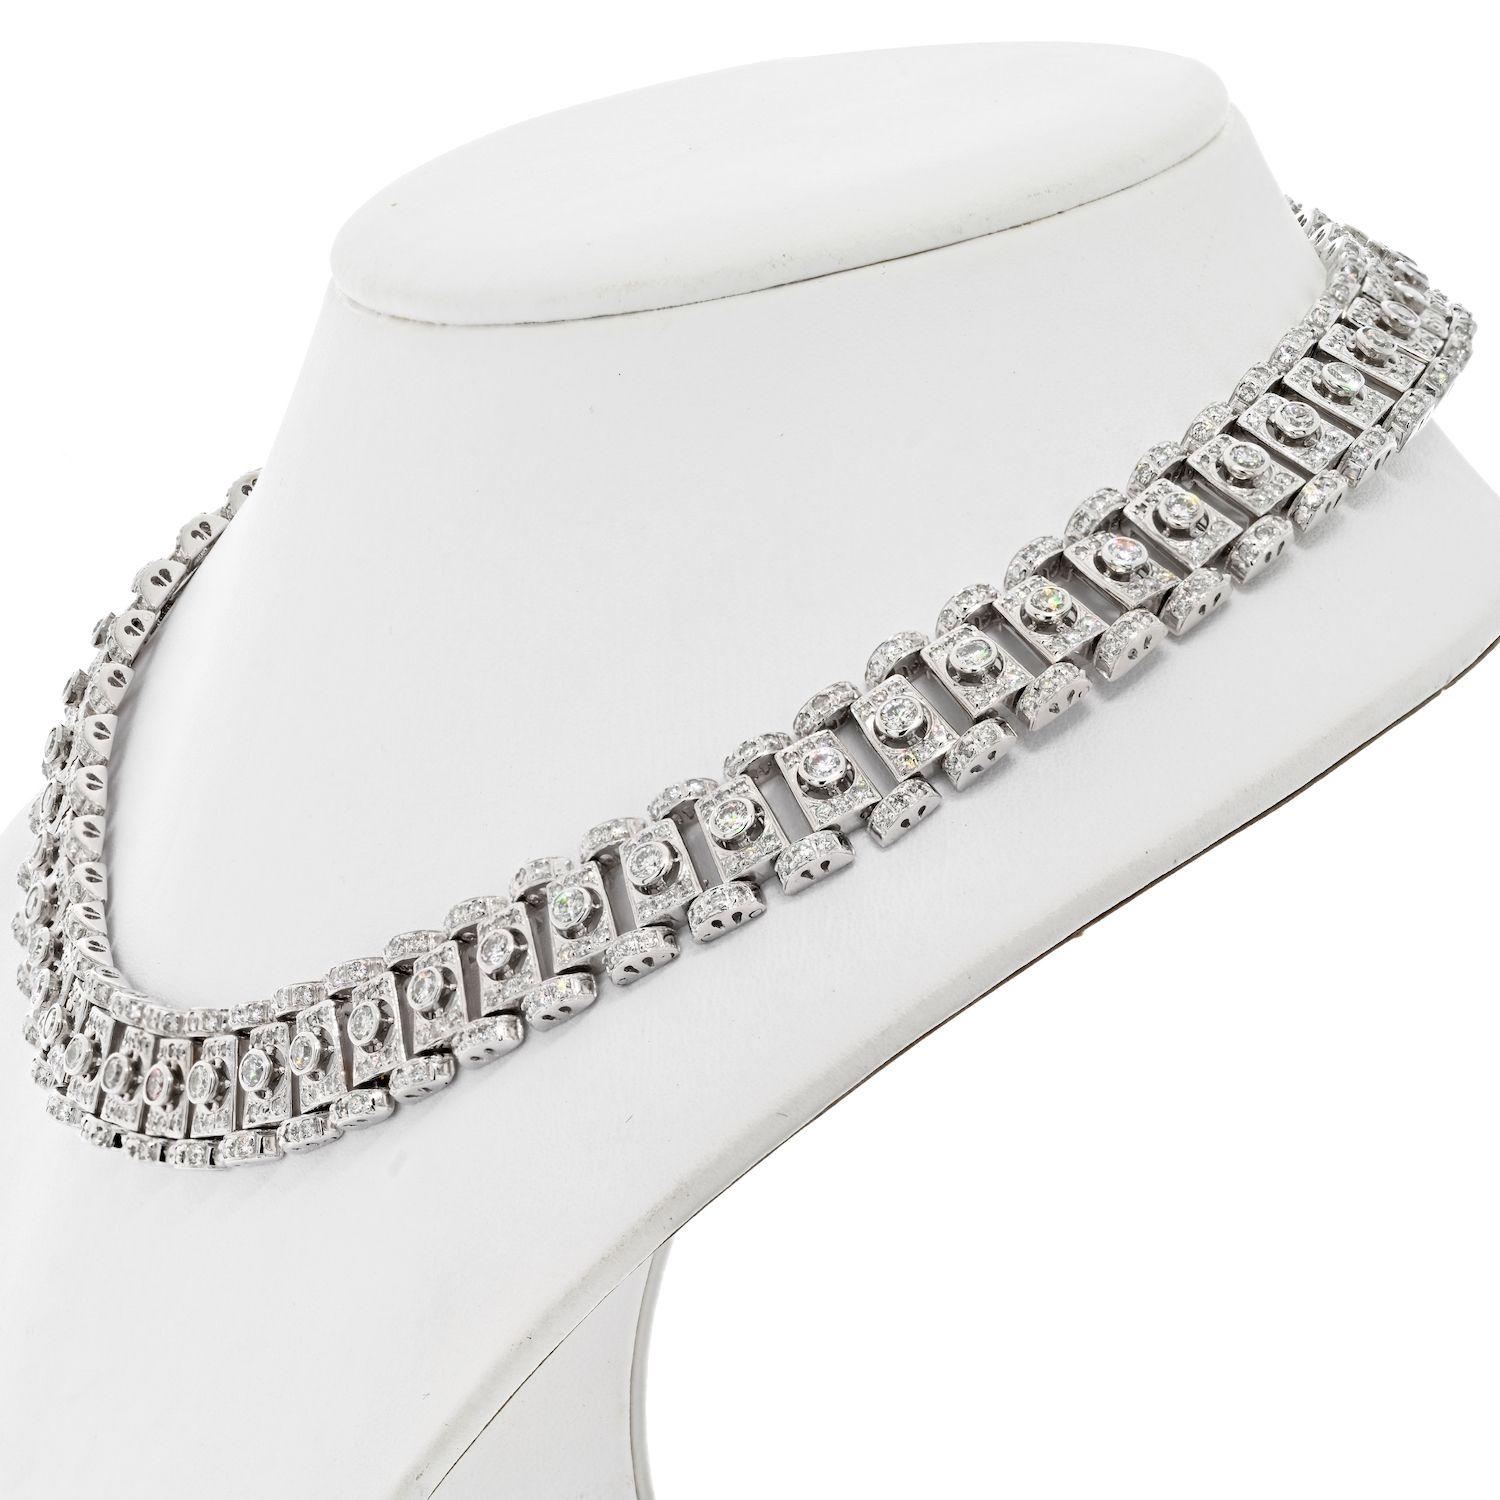 Comes to us from our estate collection this lovely collar necklace is crafted in 18k white gold mounted with over 700 of round diamonds with total carat weight of 20.00cttw. This is a perfect necklace to wear as a statement piece or as a necklace